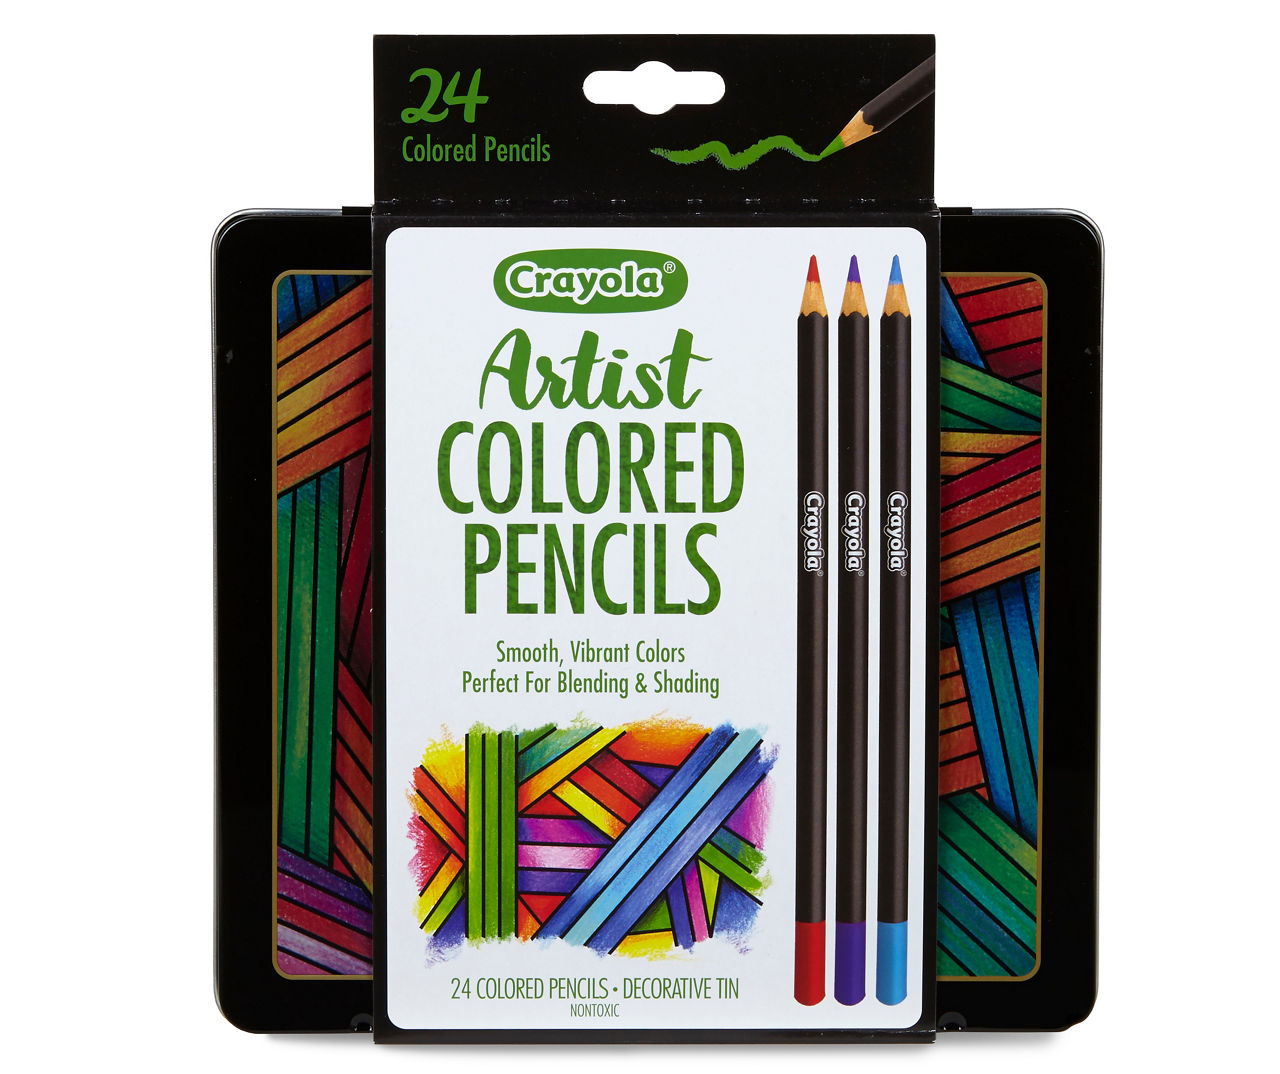 Order Crayola Big Colouring Case - Crayola, delivered to your home